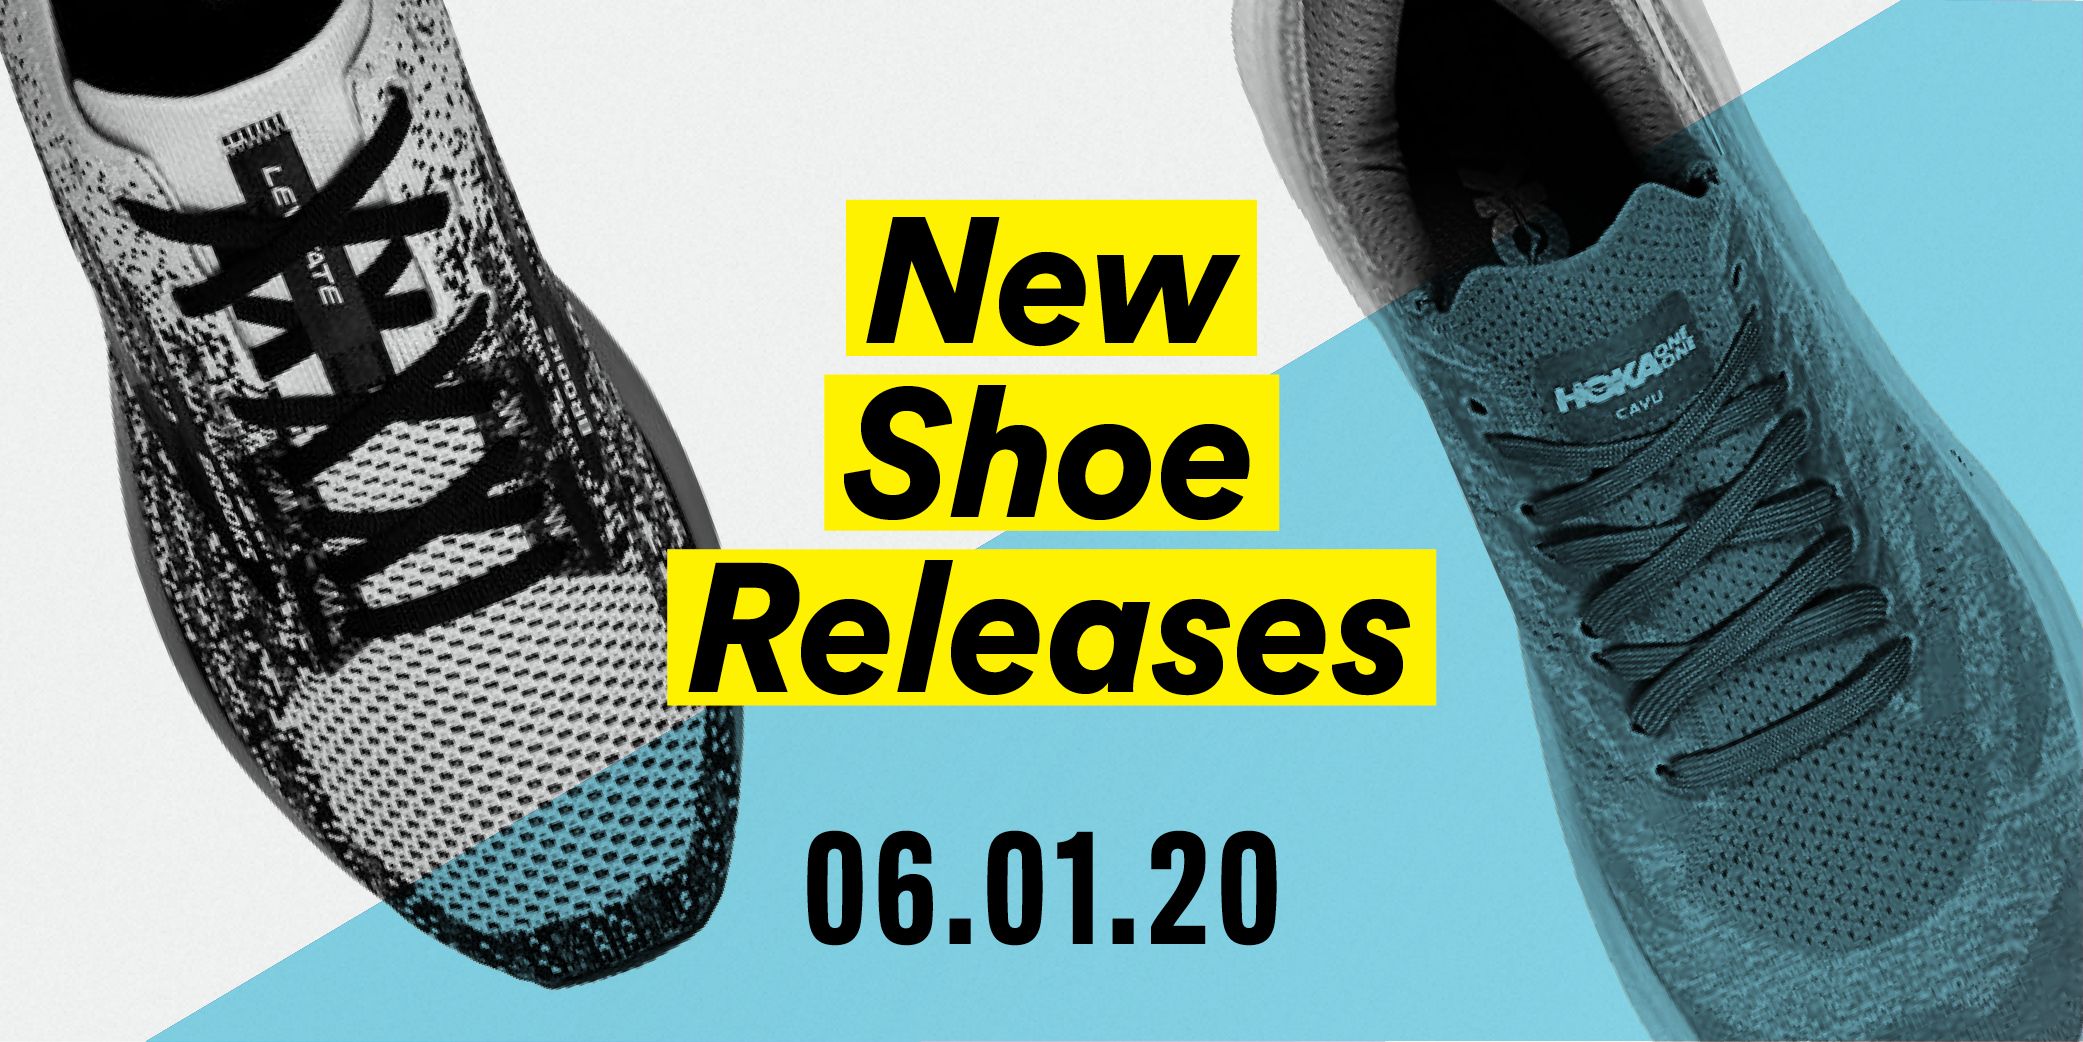 new brooks shoes release dates